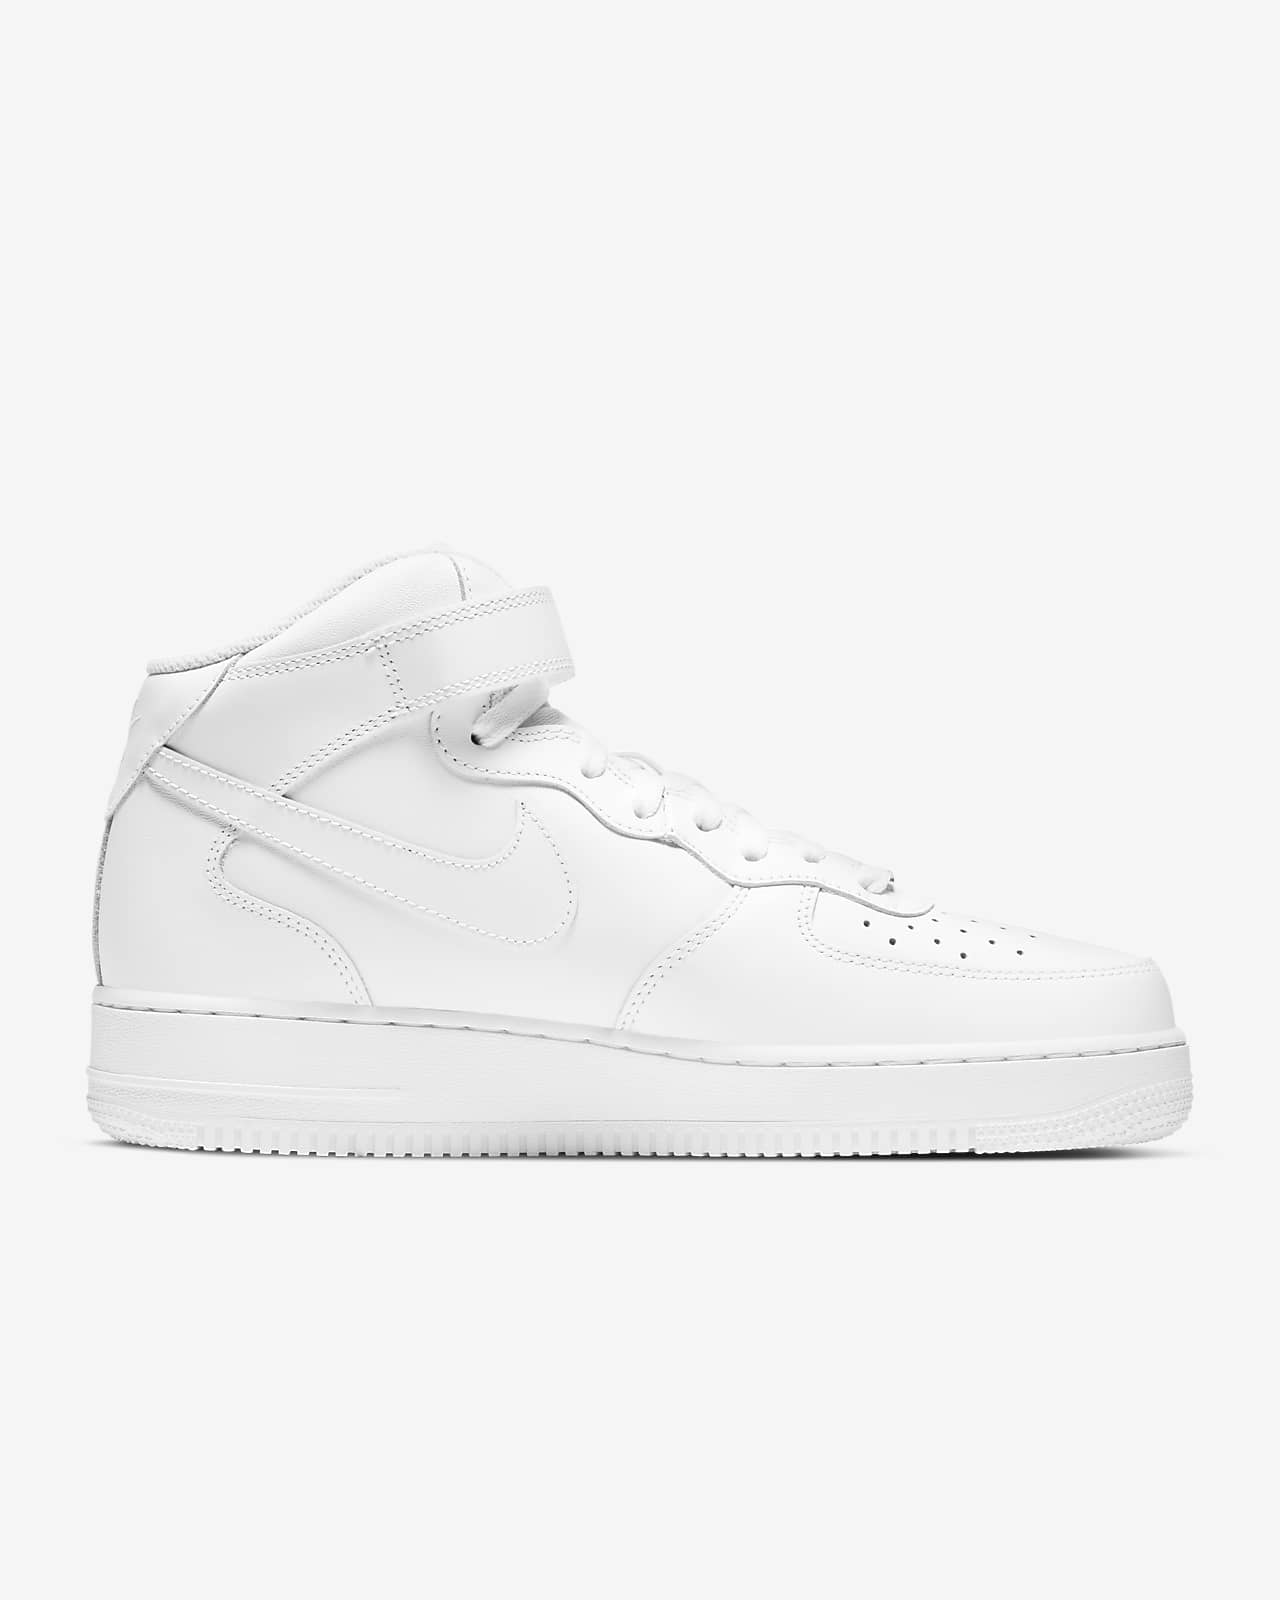 men's nike air force 1 mid casual shoes